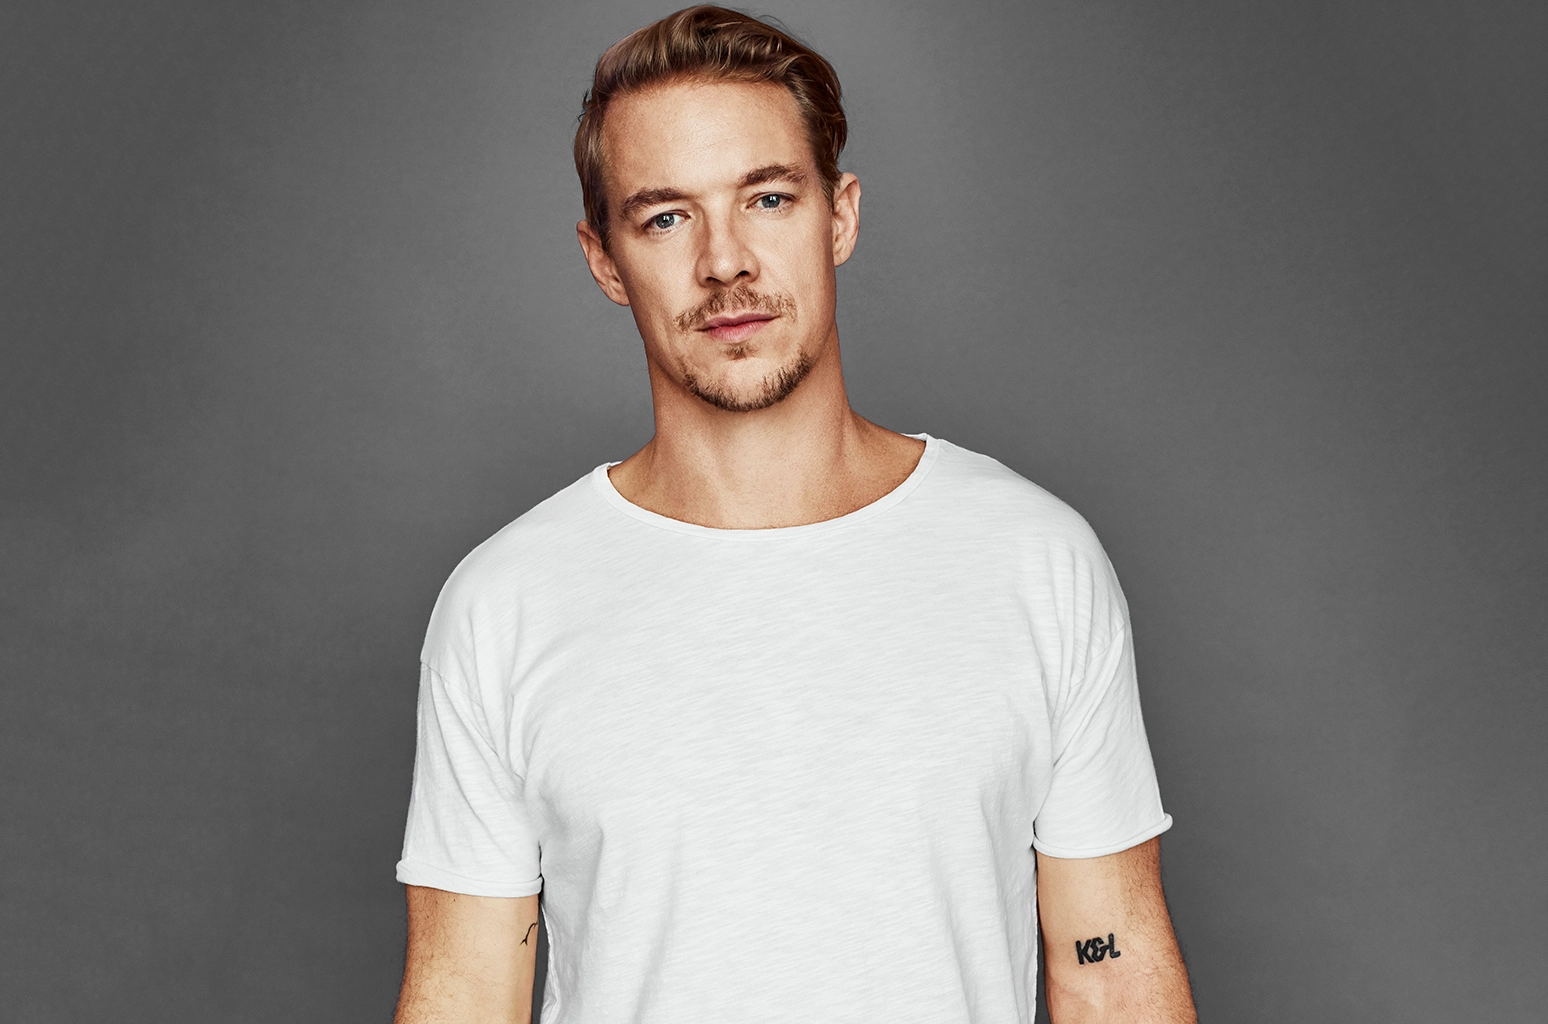 Diplo admits to receiving oral sex from a man